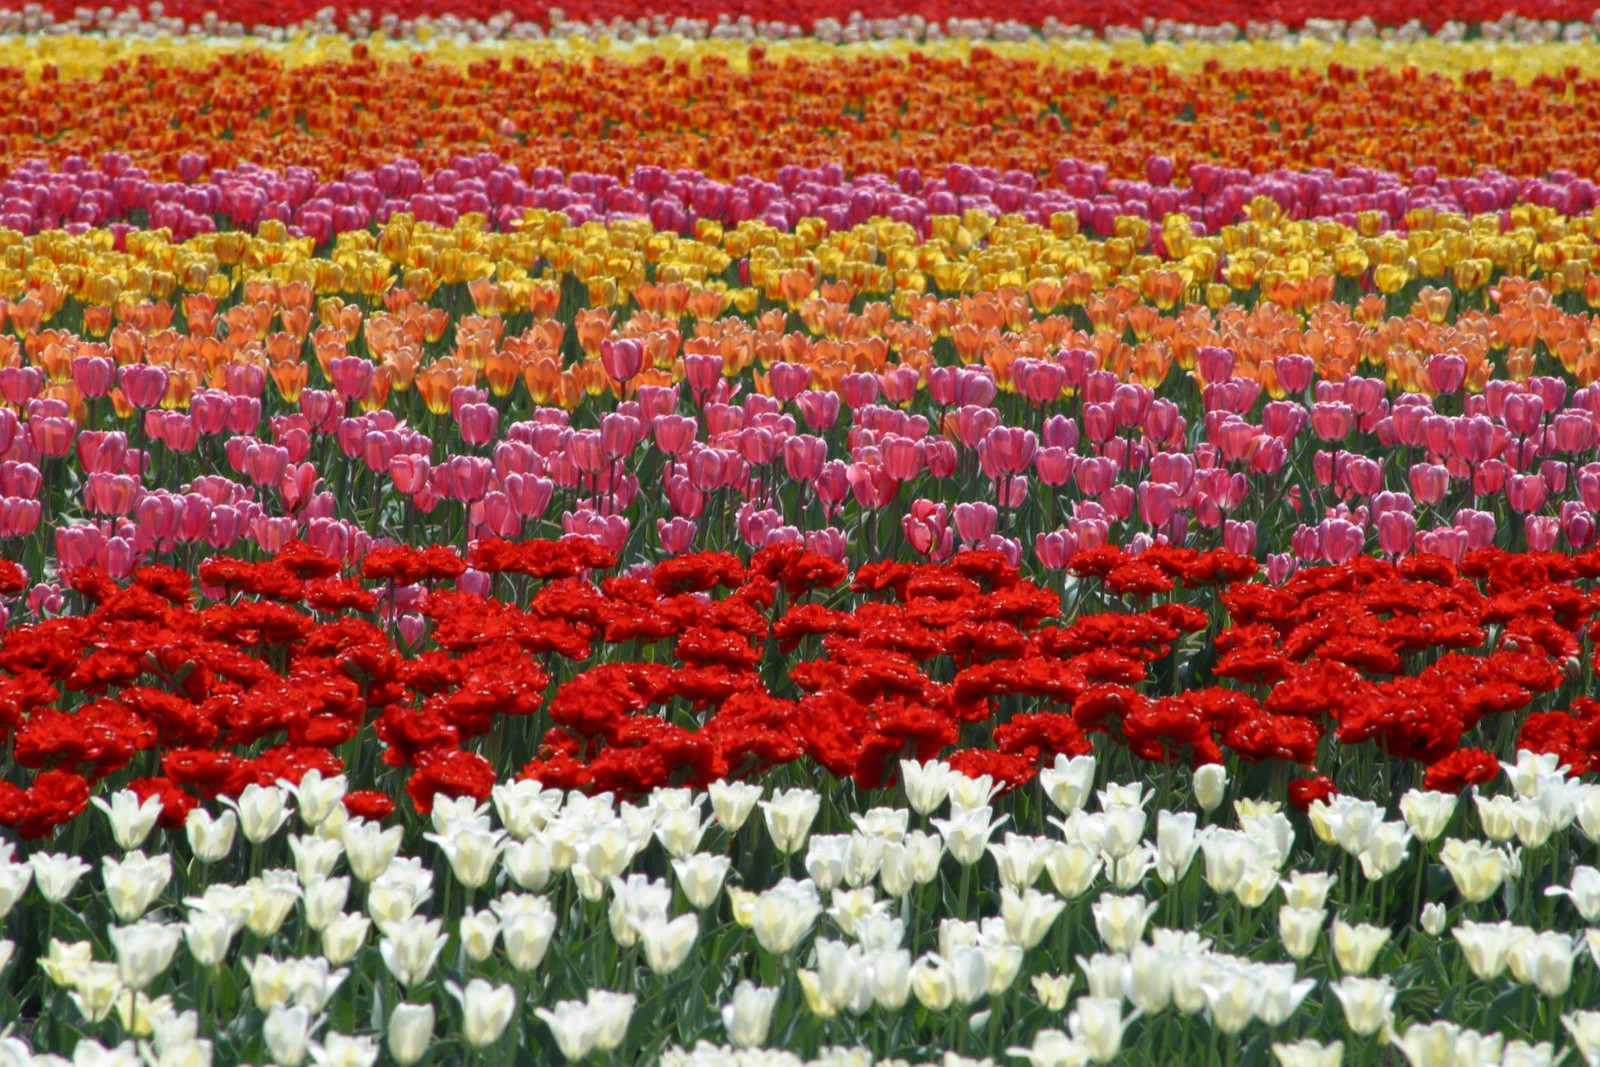 The row of colourful tulips